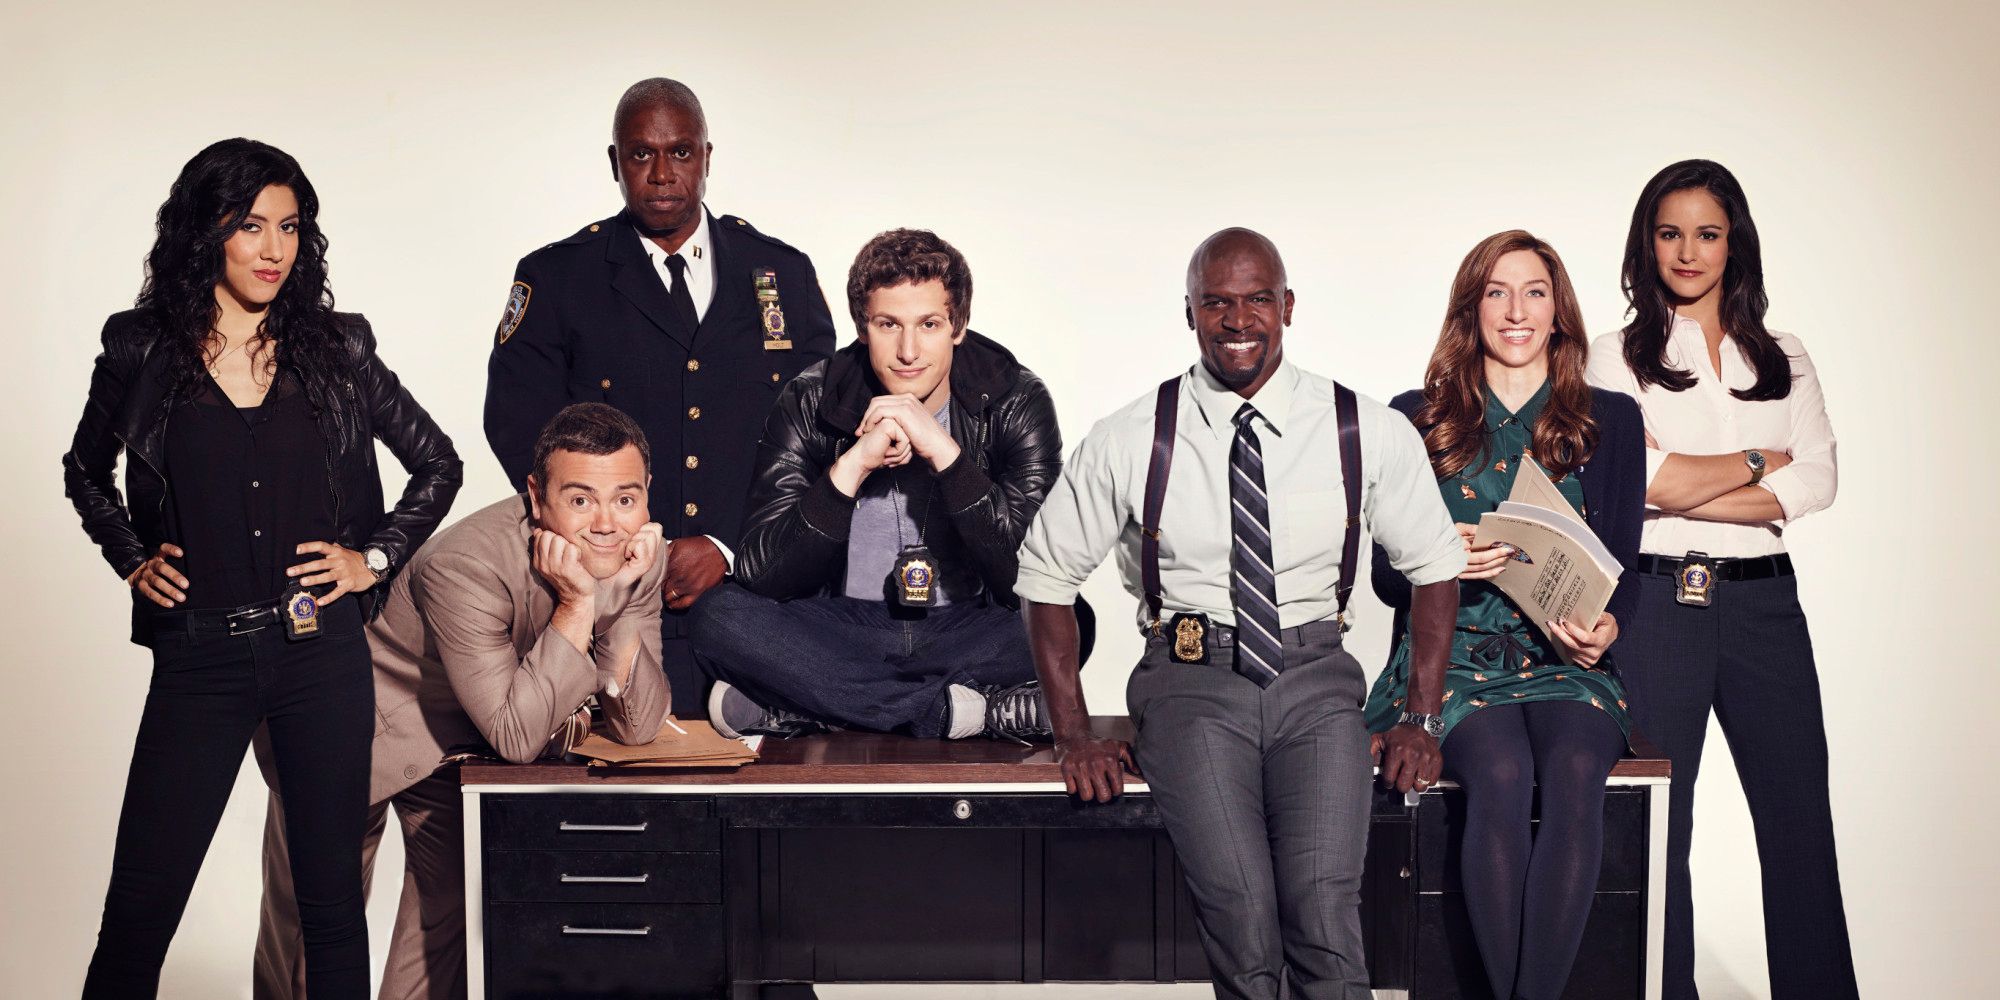 The cast of Brooklyn Nine-Nine pose for a promo image